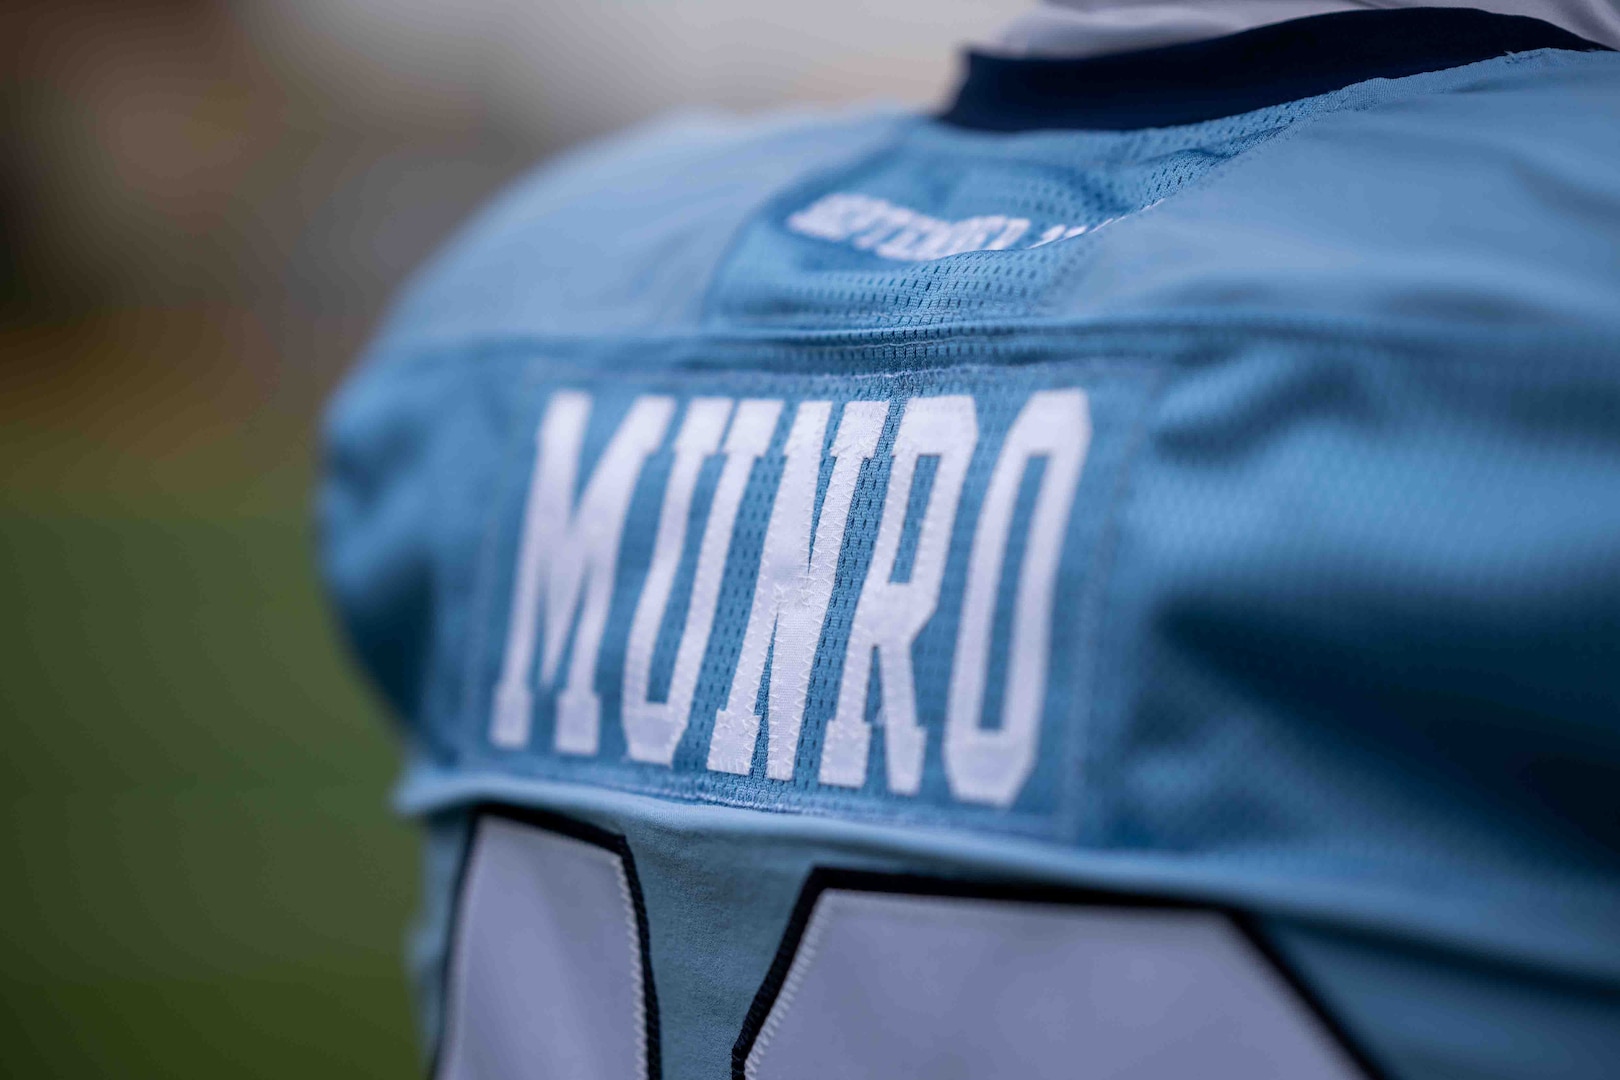 Members of the U.S. Coast Guard Academy Football team honor Douglas Munro with a new uniform. Douglas Munro, the U.S. Coast Guard's only Medal of Honor recipient, was posthumously awarded by President Franklin D. Roosevelt who presented the medal to Munro’s parents in the spring of 1943.(U.S. Coast Guard Video by Petty Officer 2nd Class Taylor Bacon)